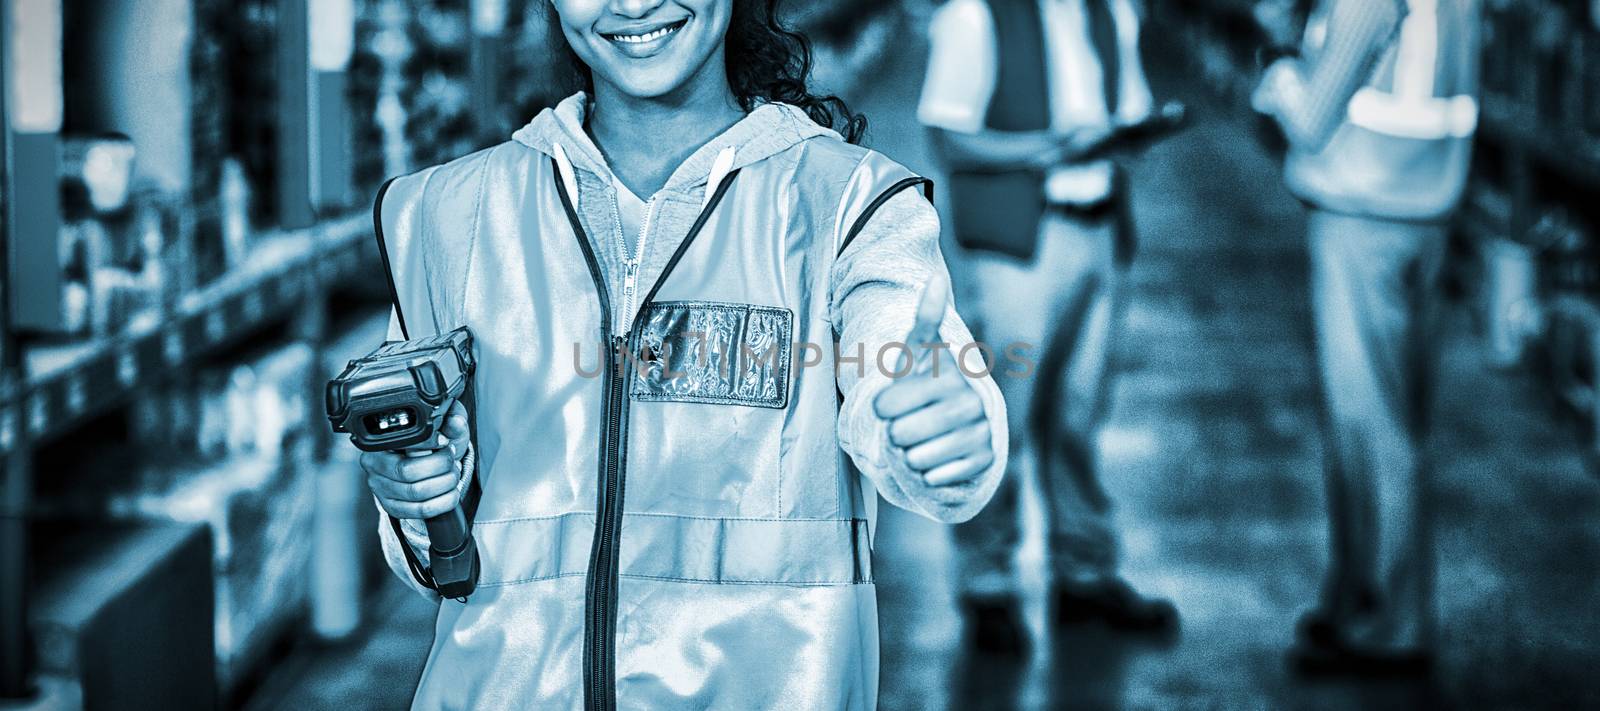 Smiling female worker with thumb up in warehouse